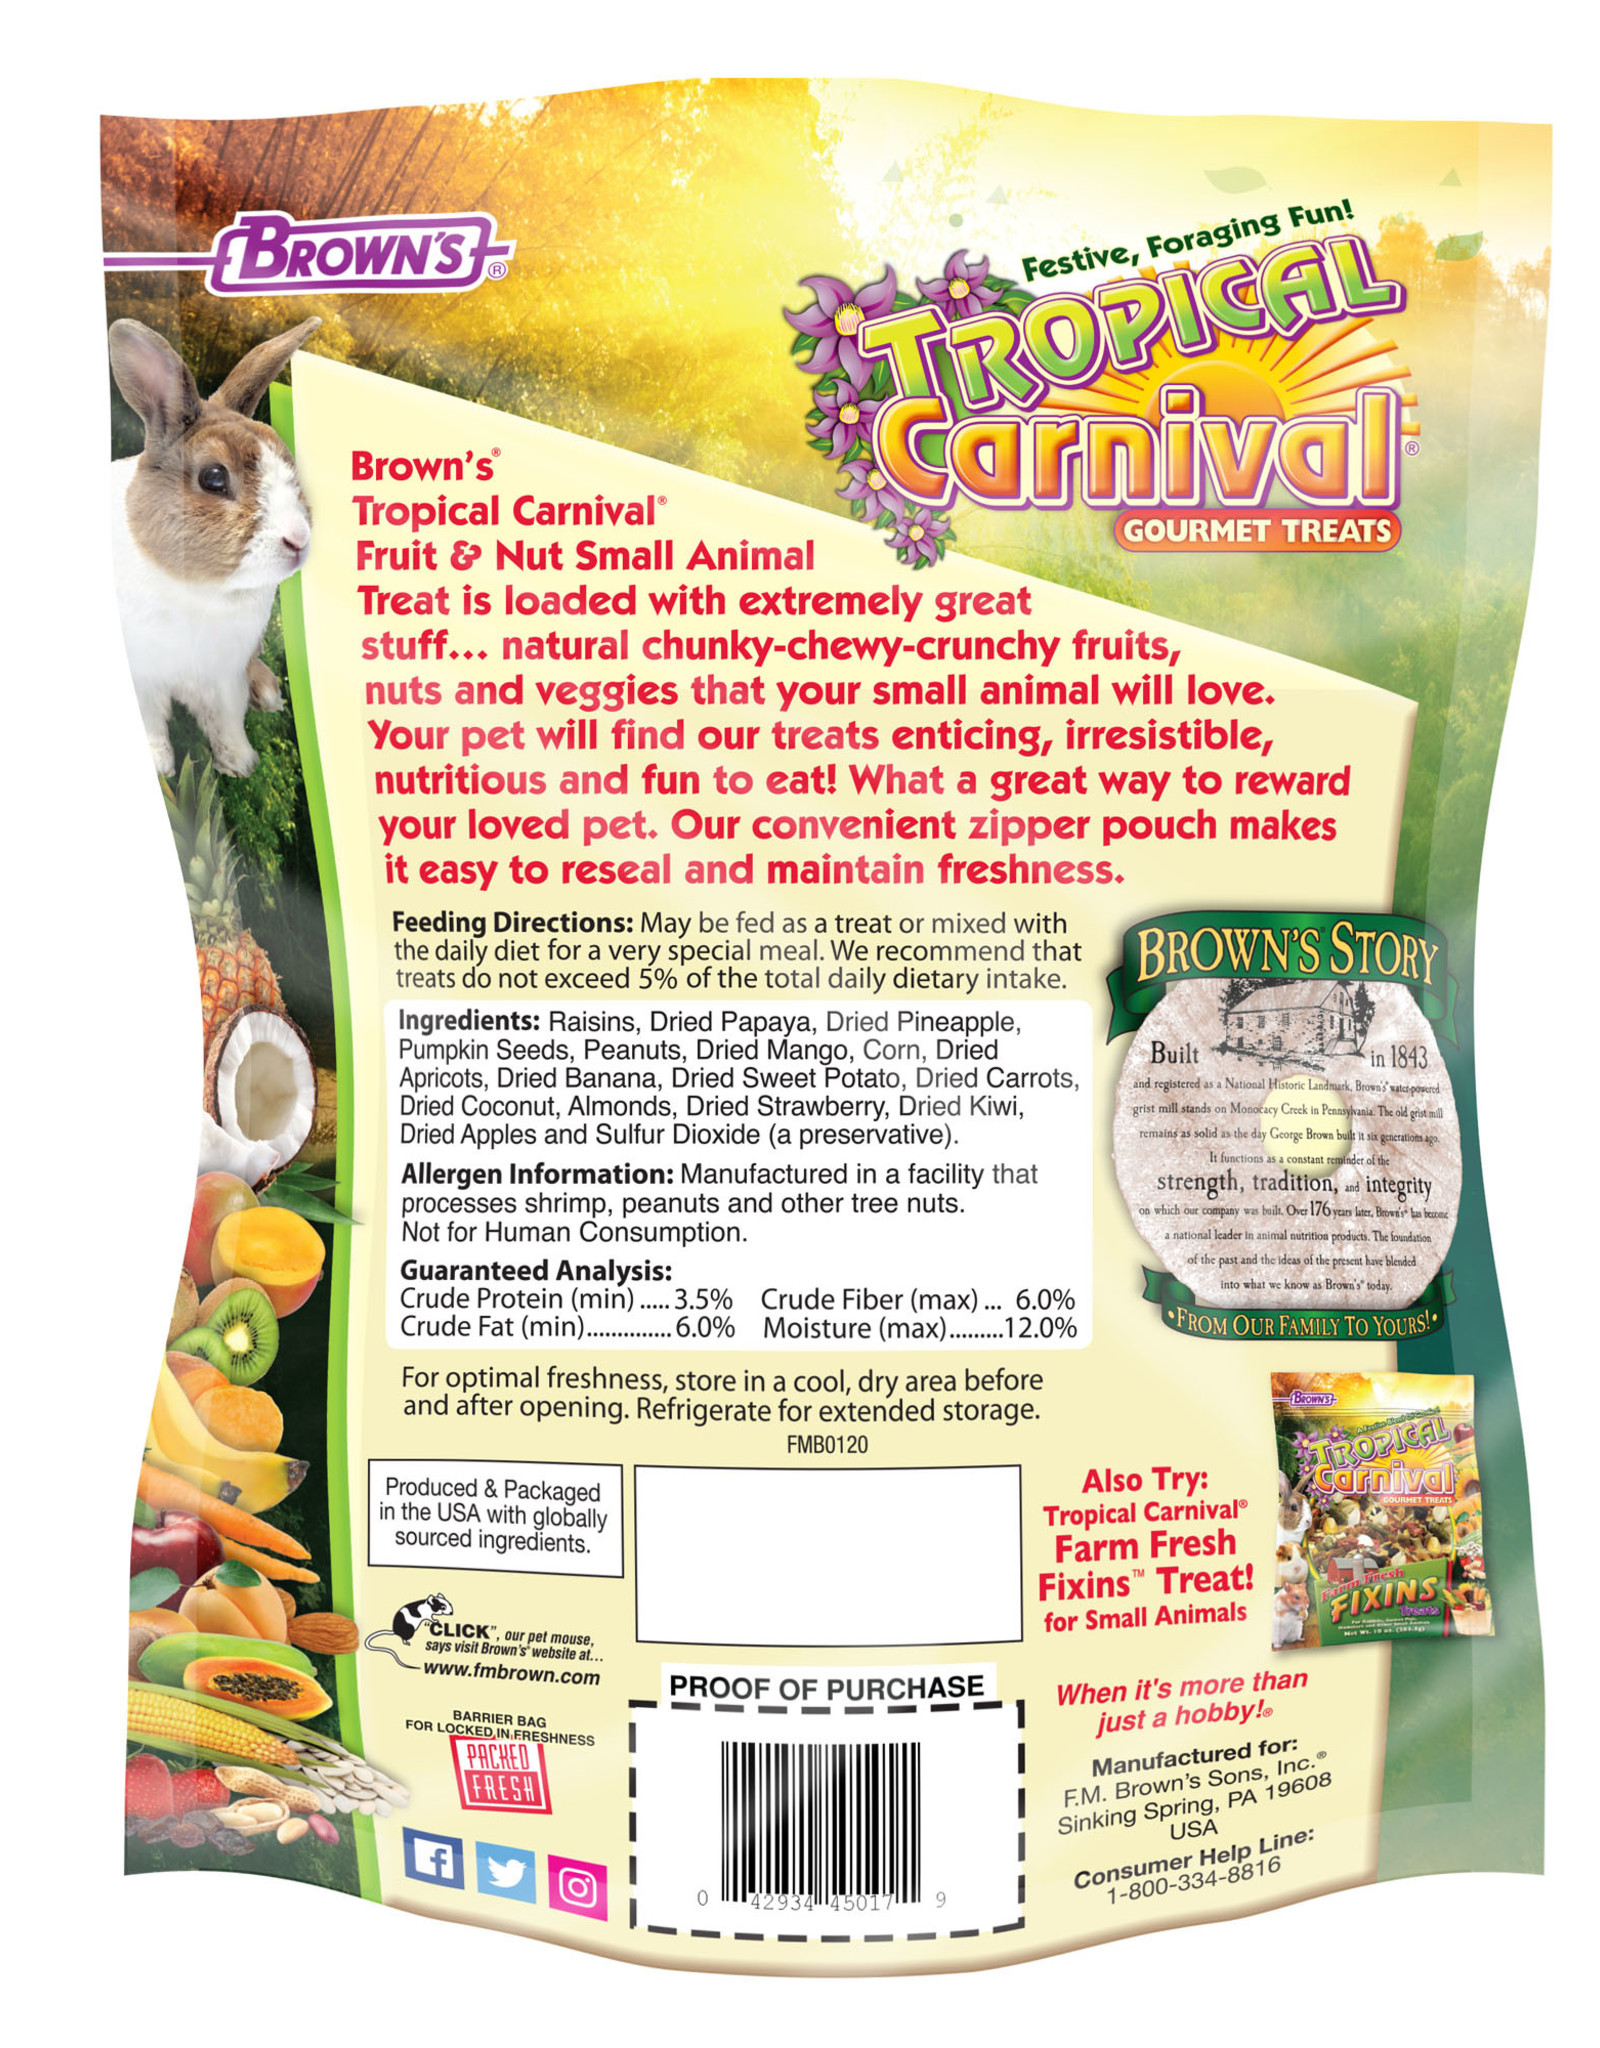 F.M. BROWN'S SONS, INC. TROPICAL CARNIVAL FRUIT AND NUT TREAT 8OZ